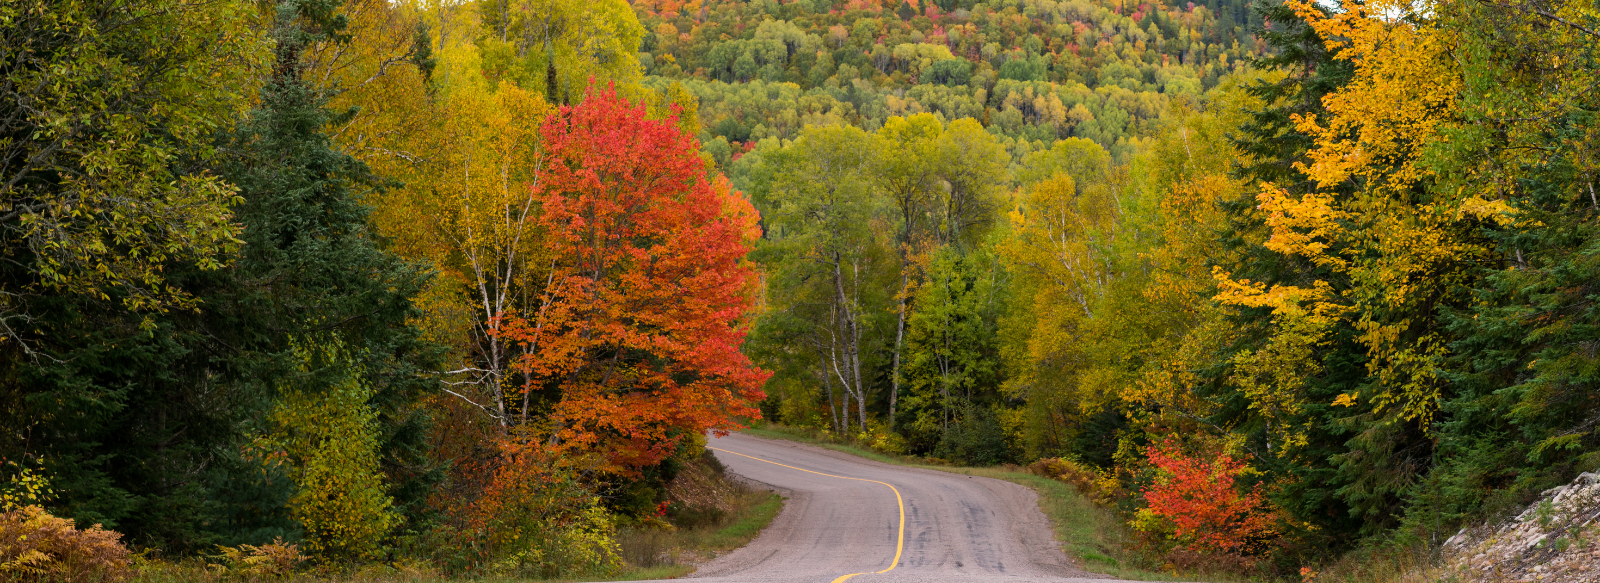 Country road in the fall with tree leaves changing colour 